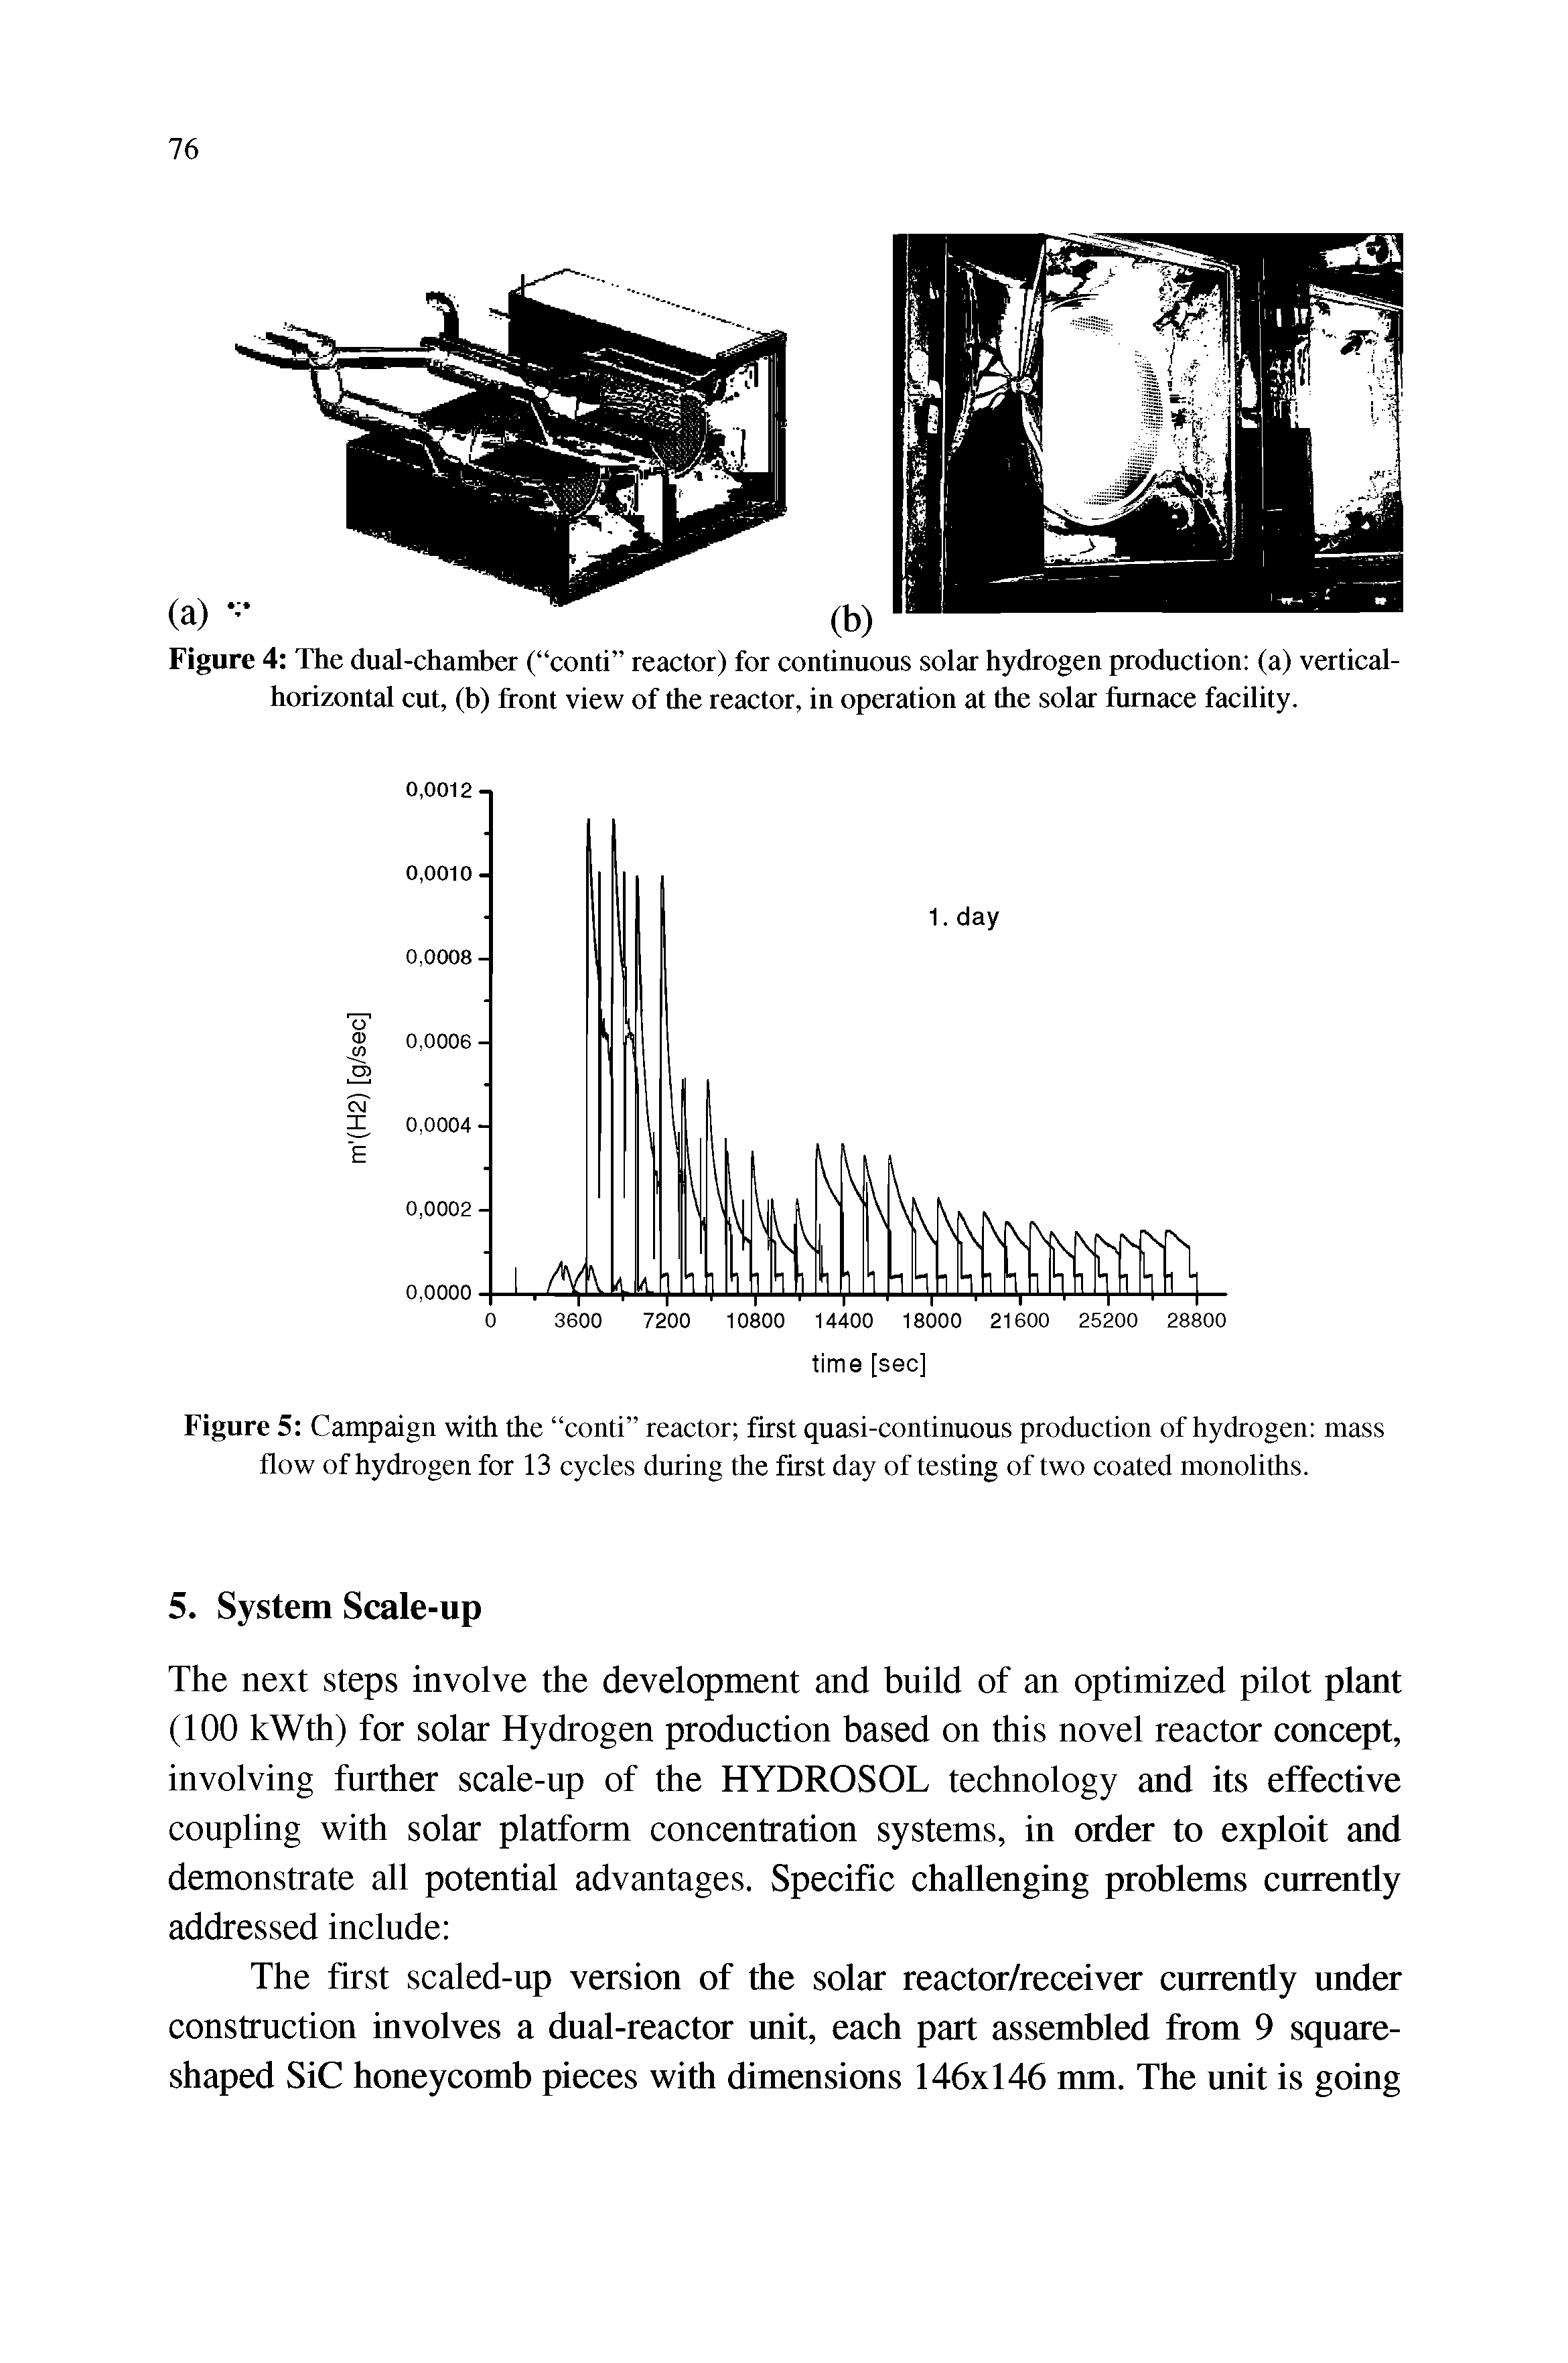 Figure 5 Campaign with the conti reactor first quasi-continuous production of hydrogen mass flow of hydrogen for 13 cycles during the first day of testing of two coated monoliths.